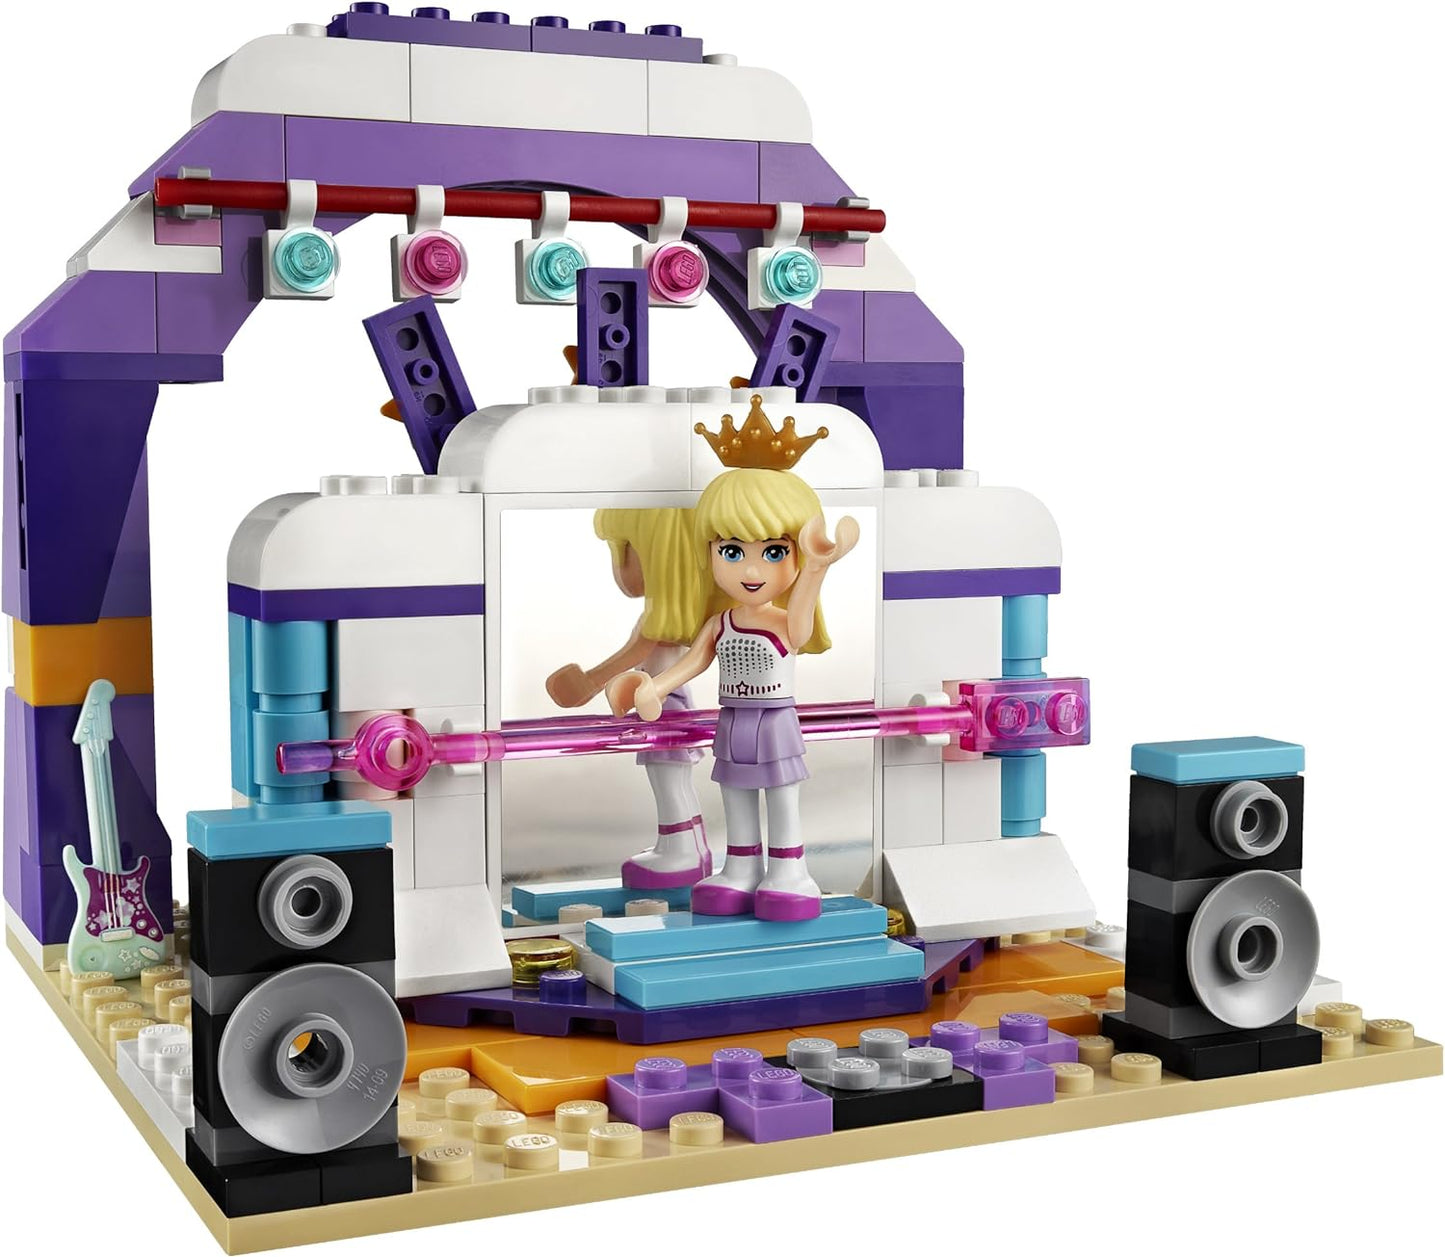 LEGO Friends Rehearsal Stage 41005